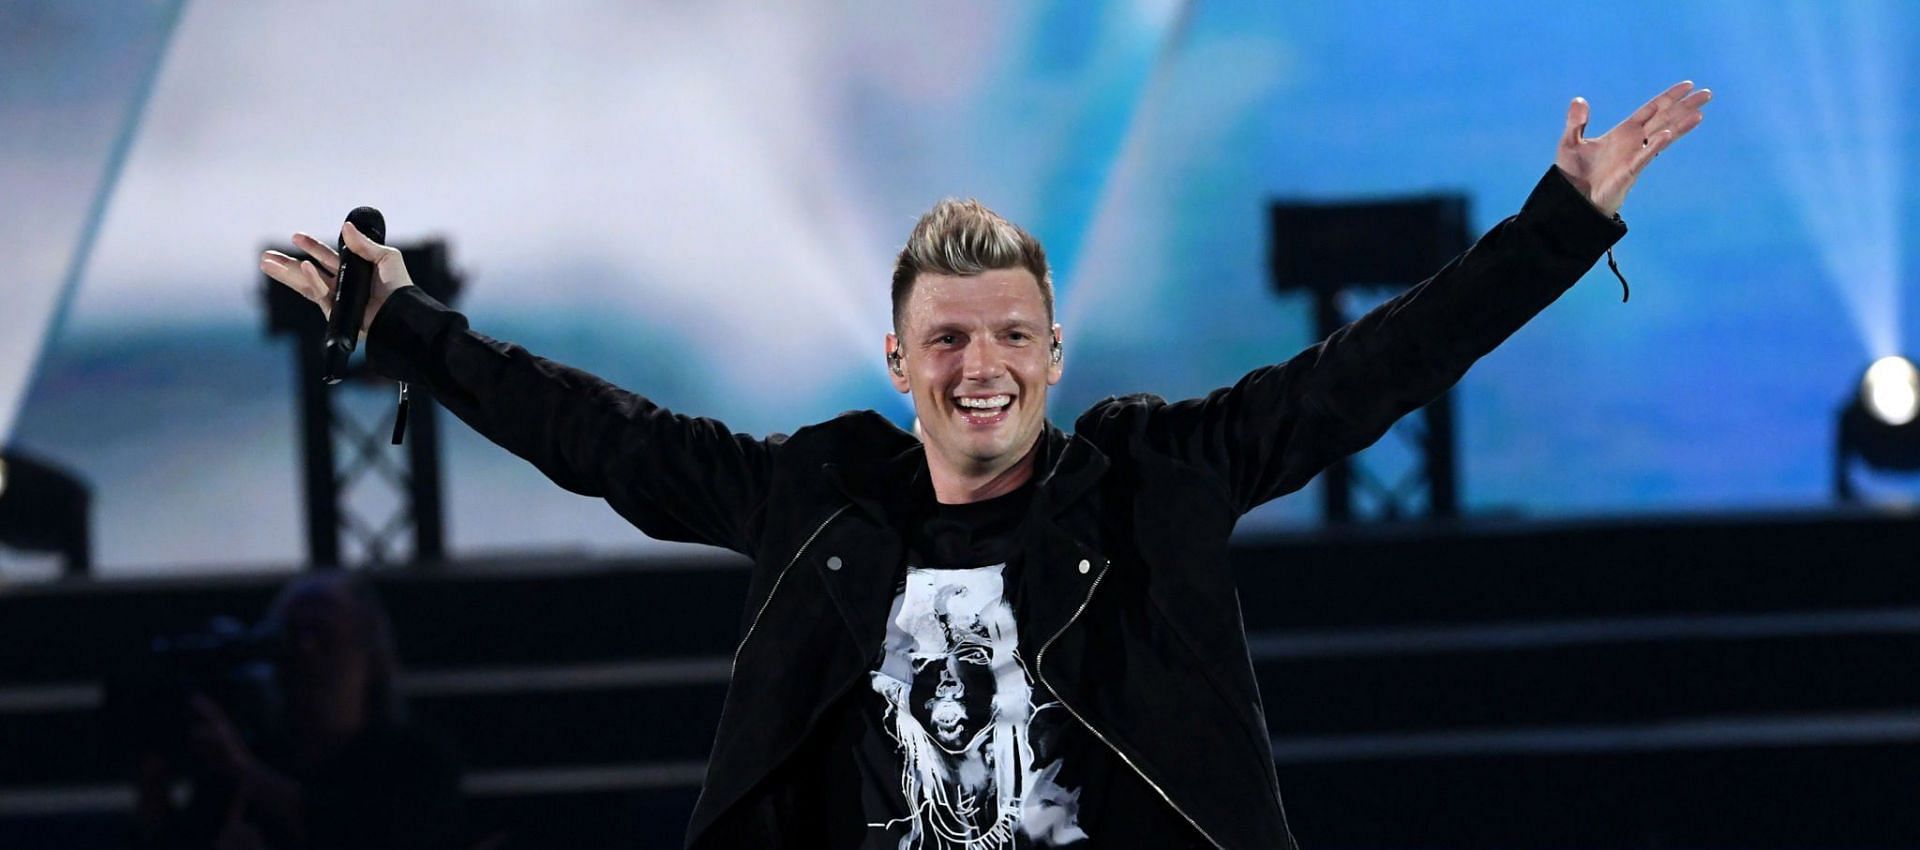 Nick Carter&#039;s attorney Michael Holtz denied the allegations made against the singer by Shannon Shay Ruth (Image via Getty Images)